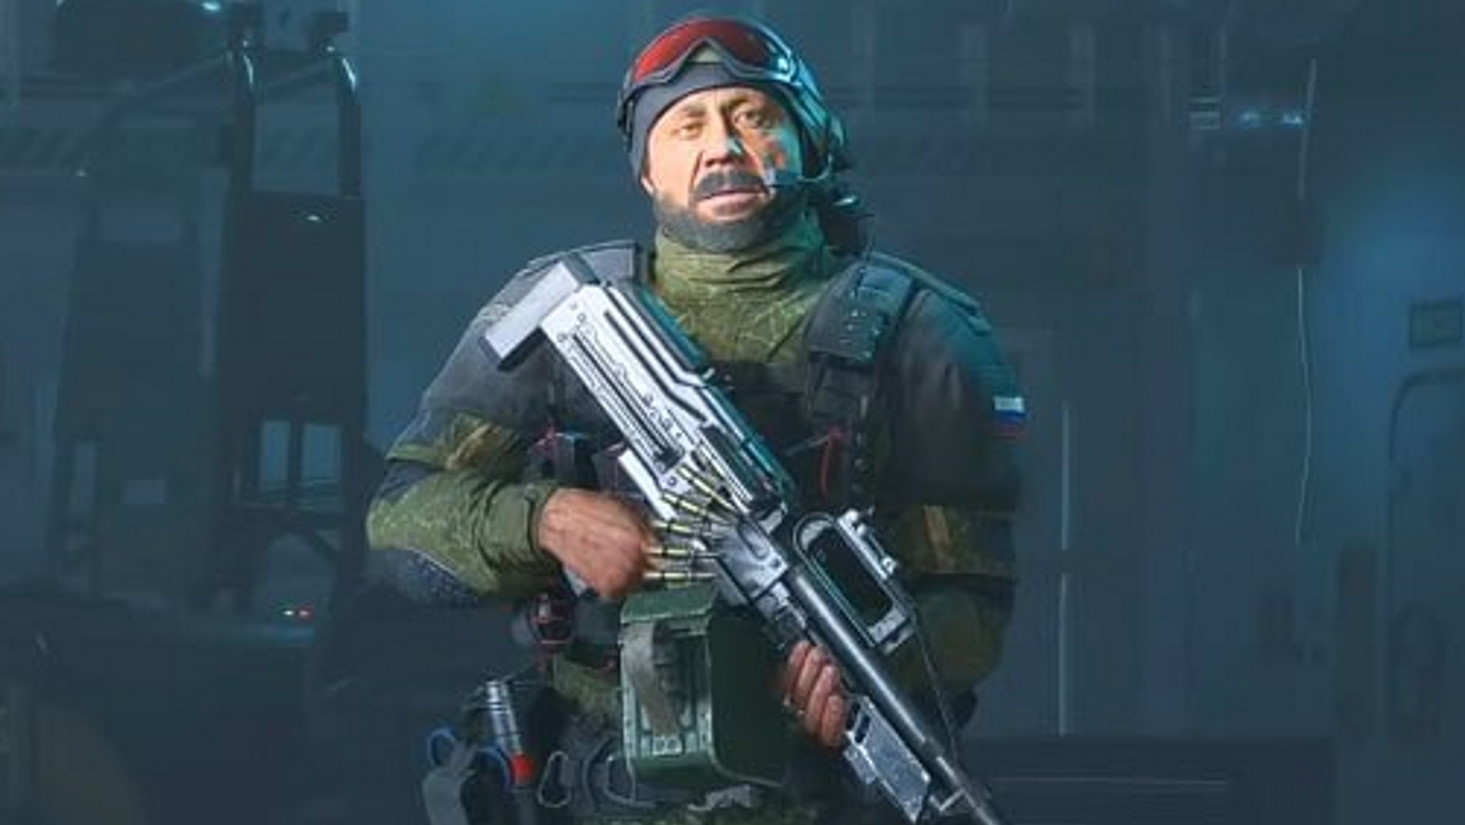 boris now looks exactly like gigachad or is it just me? : r/battlefield2042